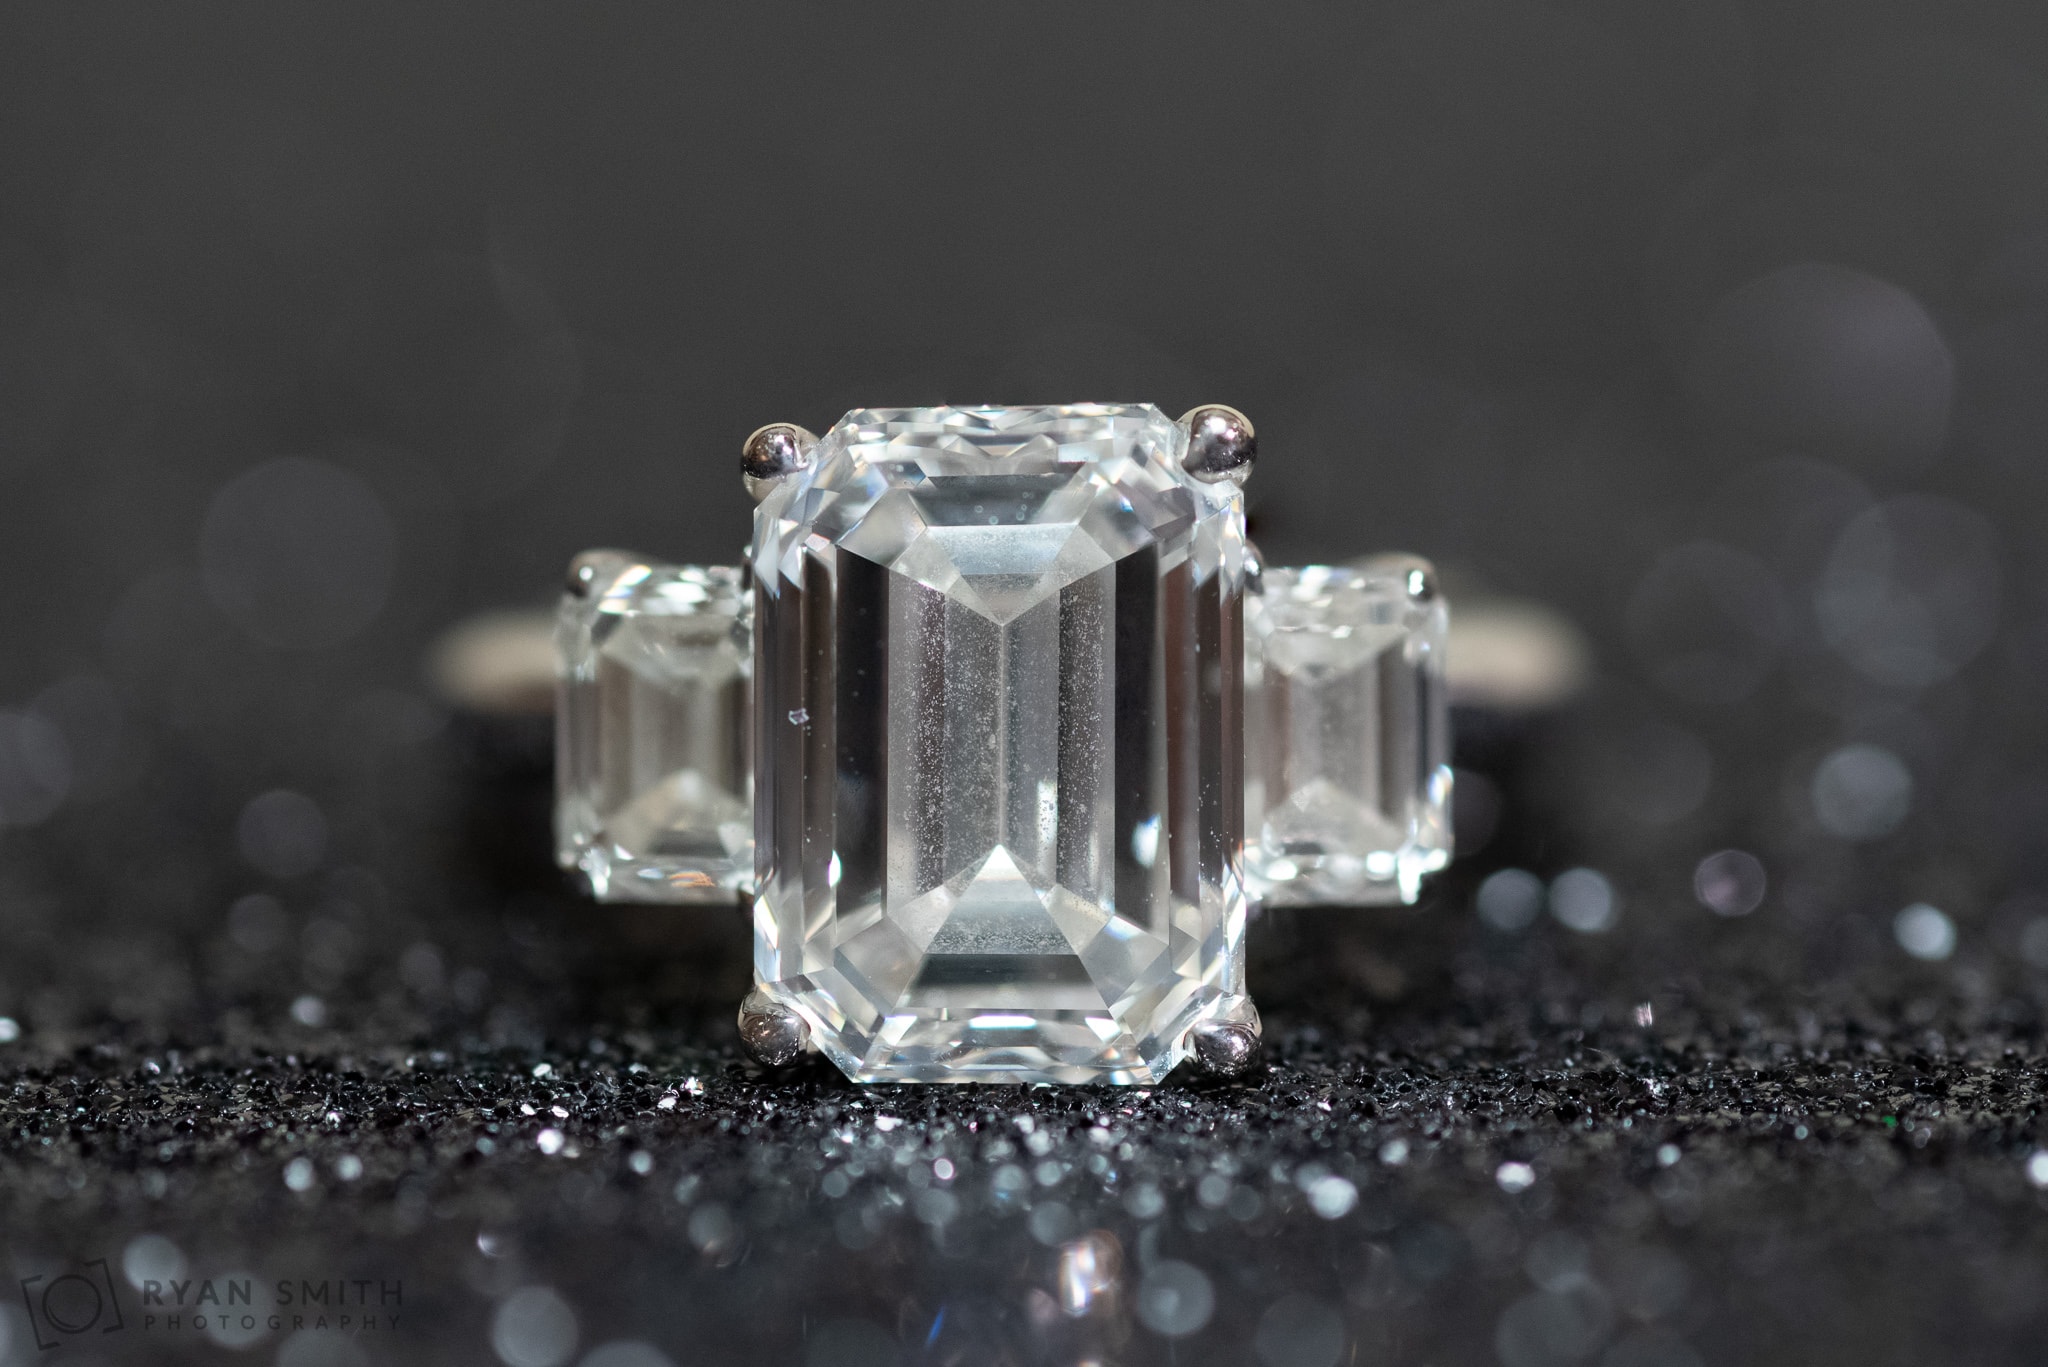 Closeup of the large diamond ring with focus stacking - Dunes Golf and Beach Club - Myrtle Beach